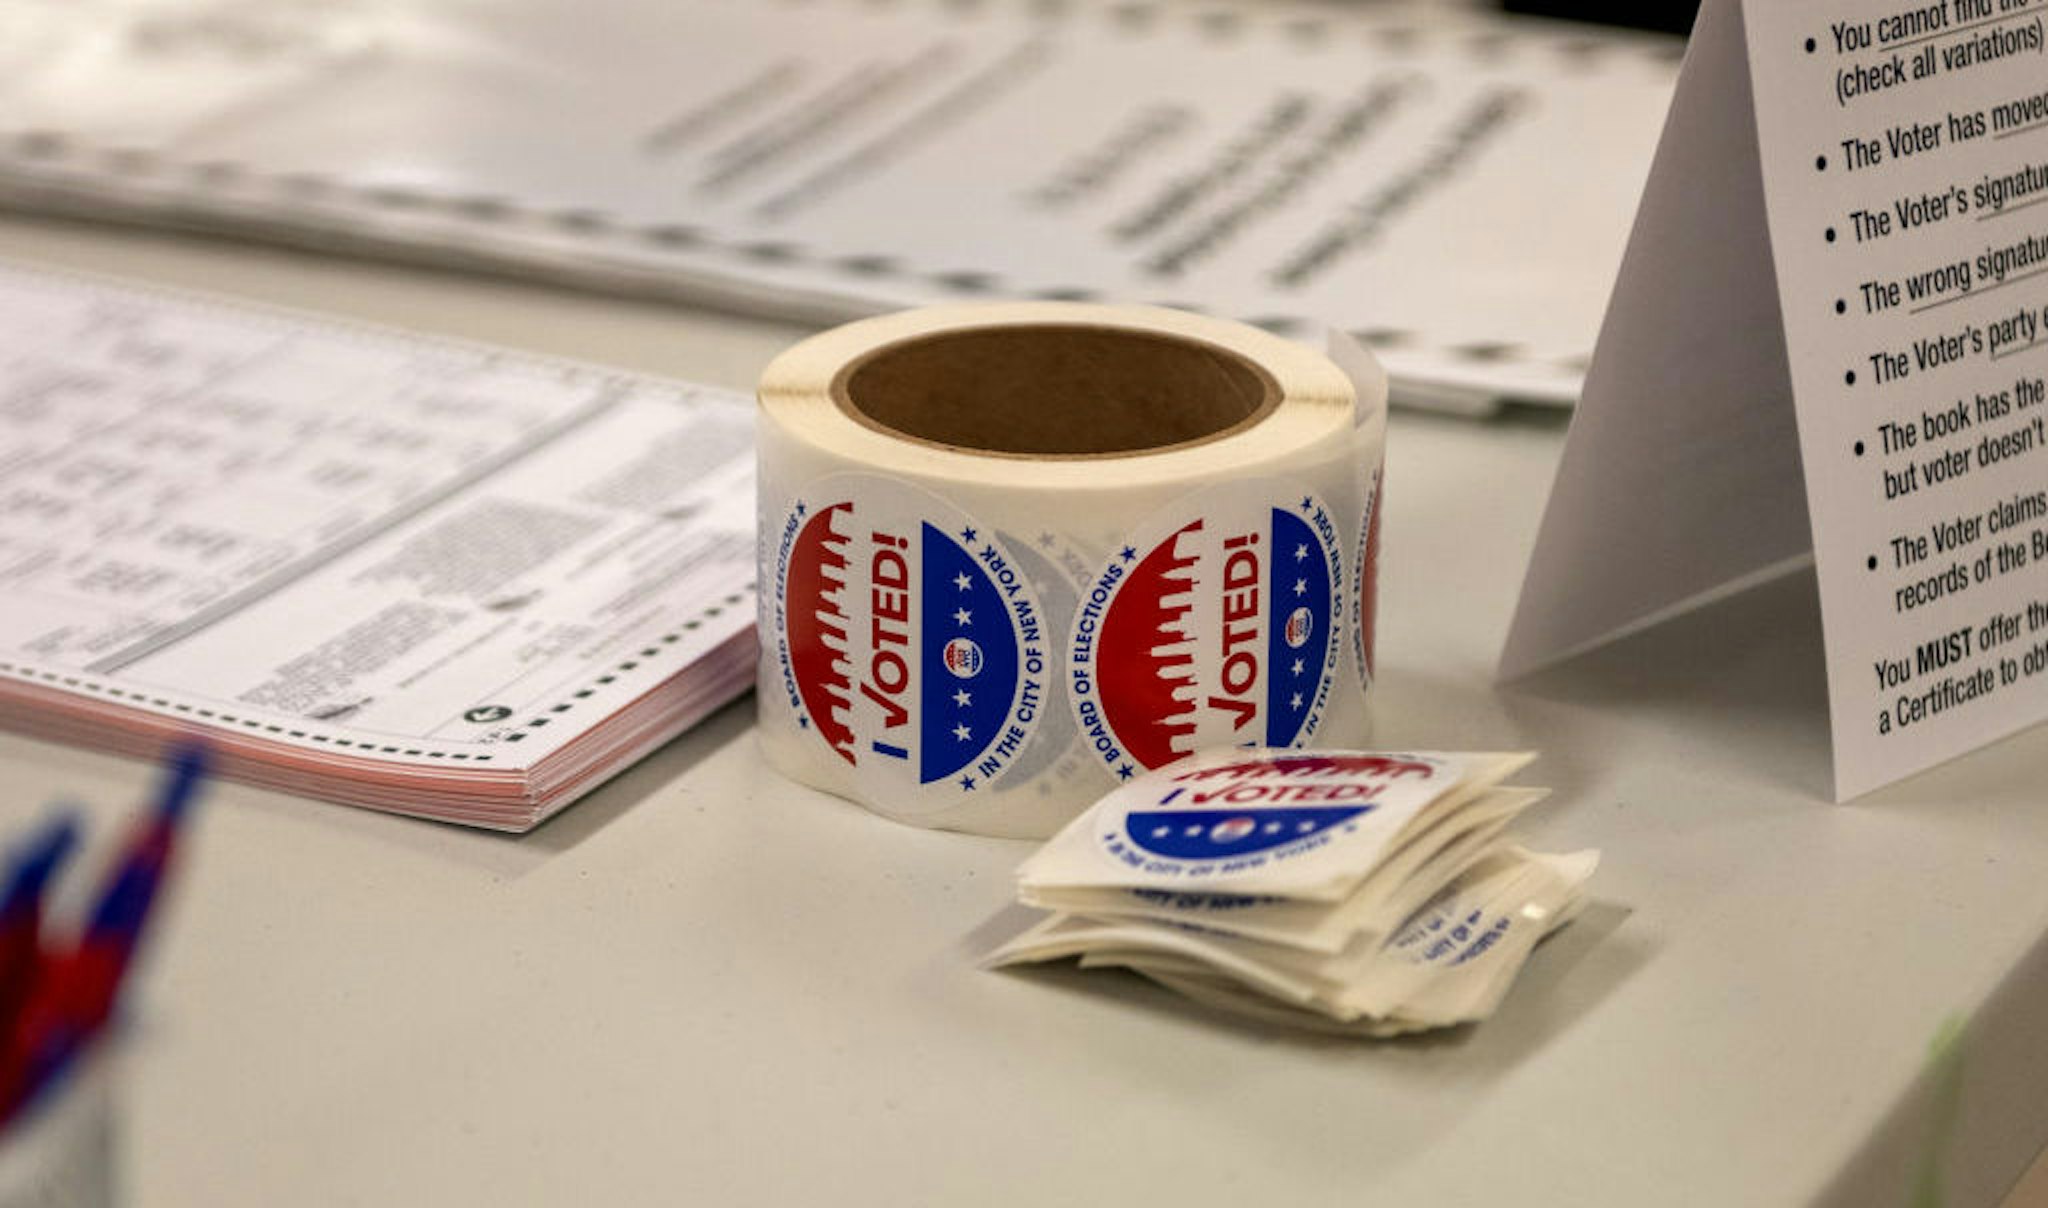 NEW YORK, NEW YORK - NOVEMBER 02: A roll of "I voted" stickers is left on a table at a polling site on the Upper West Side on November 2, 2021 in New York City. Republican mayoral candidate Curtis Sliwa was told by Board of Election officials he could not vote with his pet cat, Gizmo, and then was told he could not wear his signature red campaign windbreaker. After being allowed to vote despite wearing his windbreaker, the ballot machine became jammed, forcing election officials to step in and fix it. Sliwa's ballot was retrieved and successfully processed after over an hour. (Photo by Alexi Rosenfeld/Getty Images)